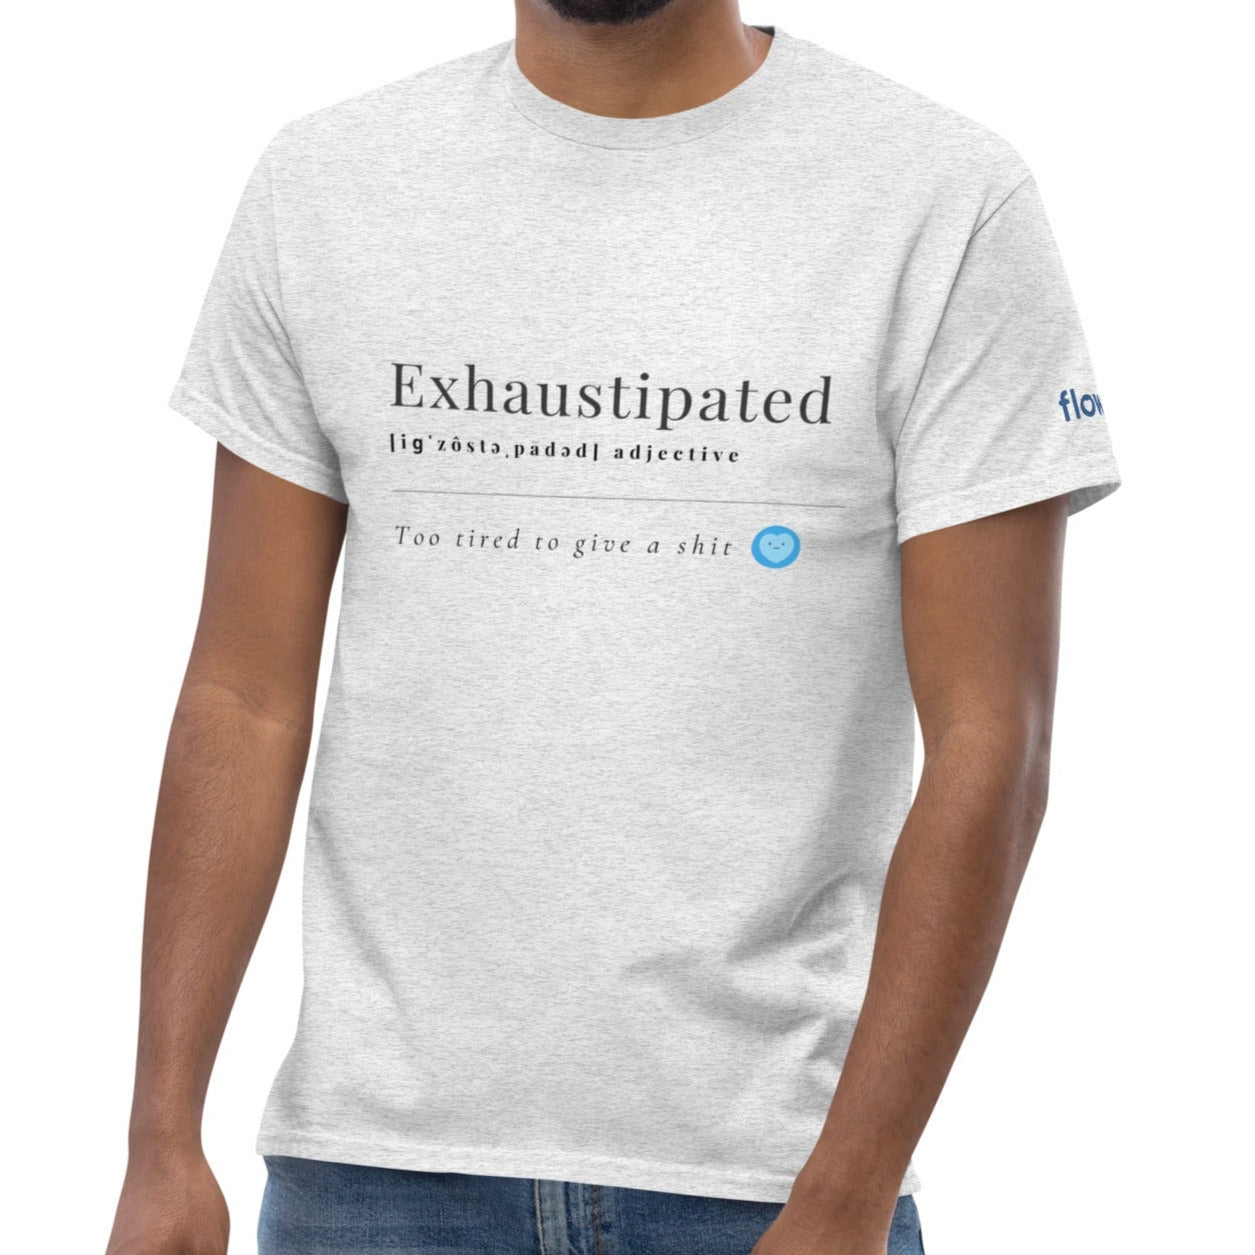 Simple Exhaustipated classic tee